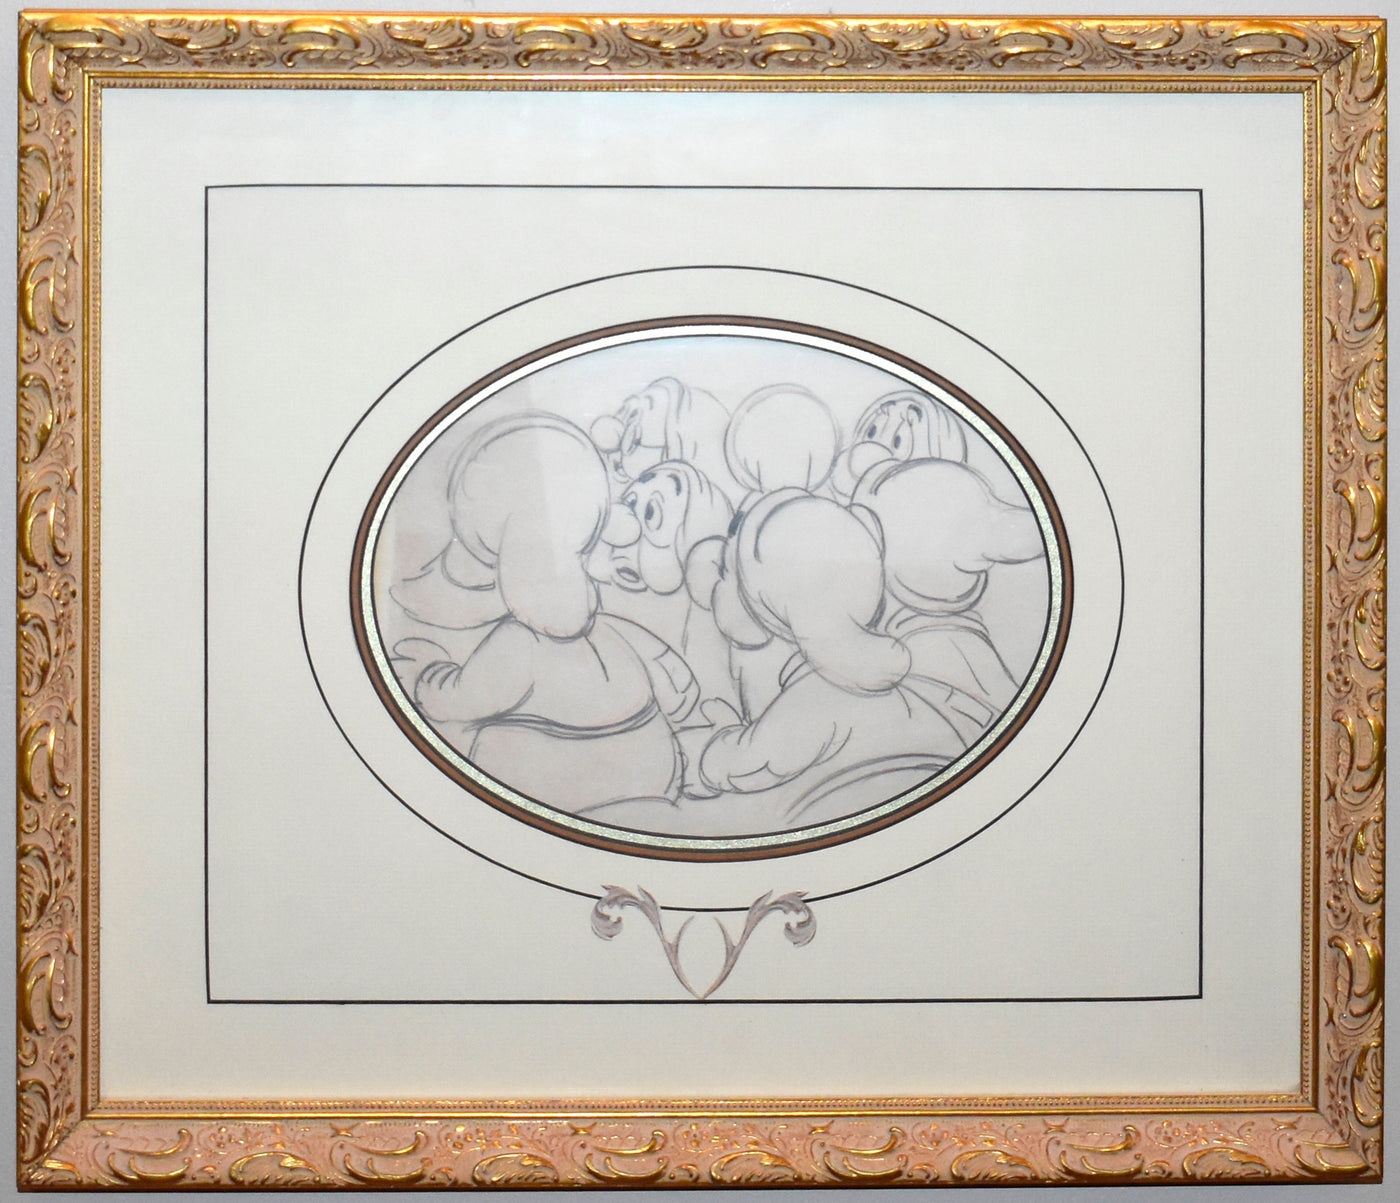 Original Walt Disney Production Drawing from Snow White and the Seven Dwarfs Featuring the Seven Dwarfs